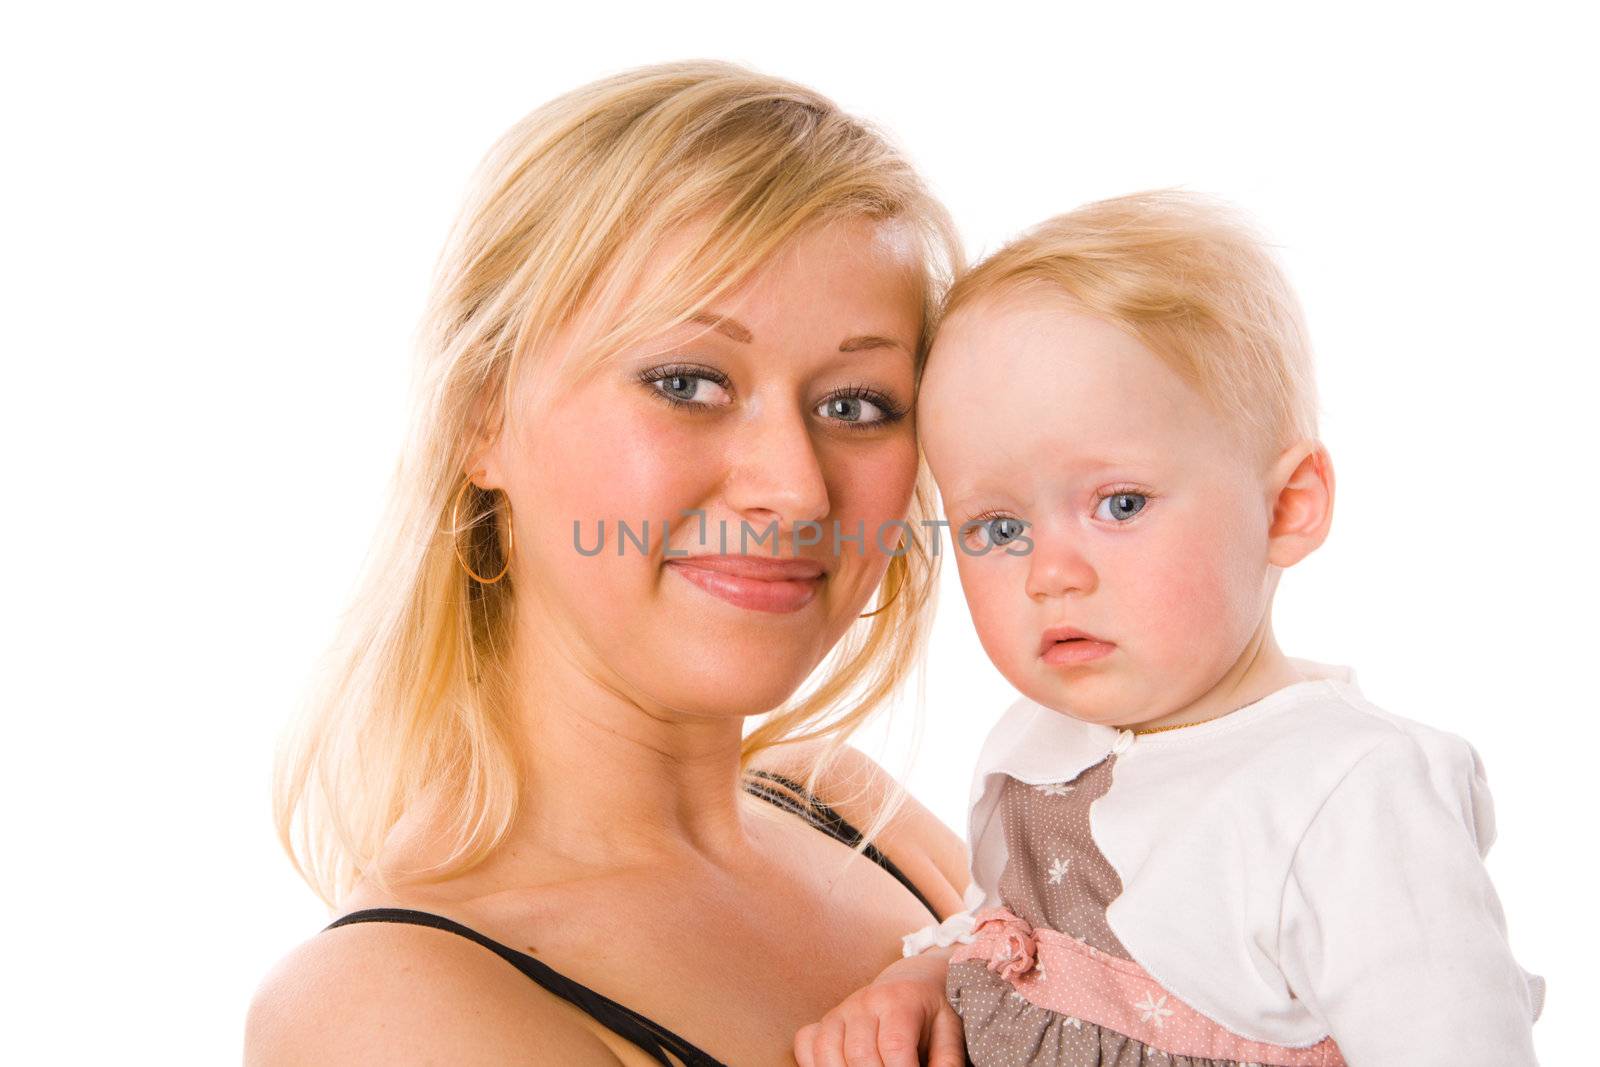 Mother holding one year daughter isolated on white